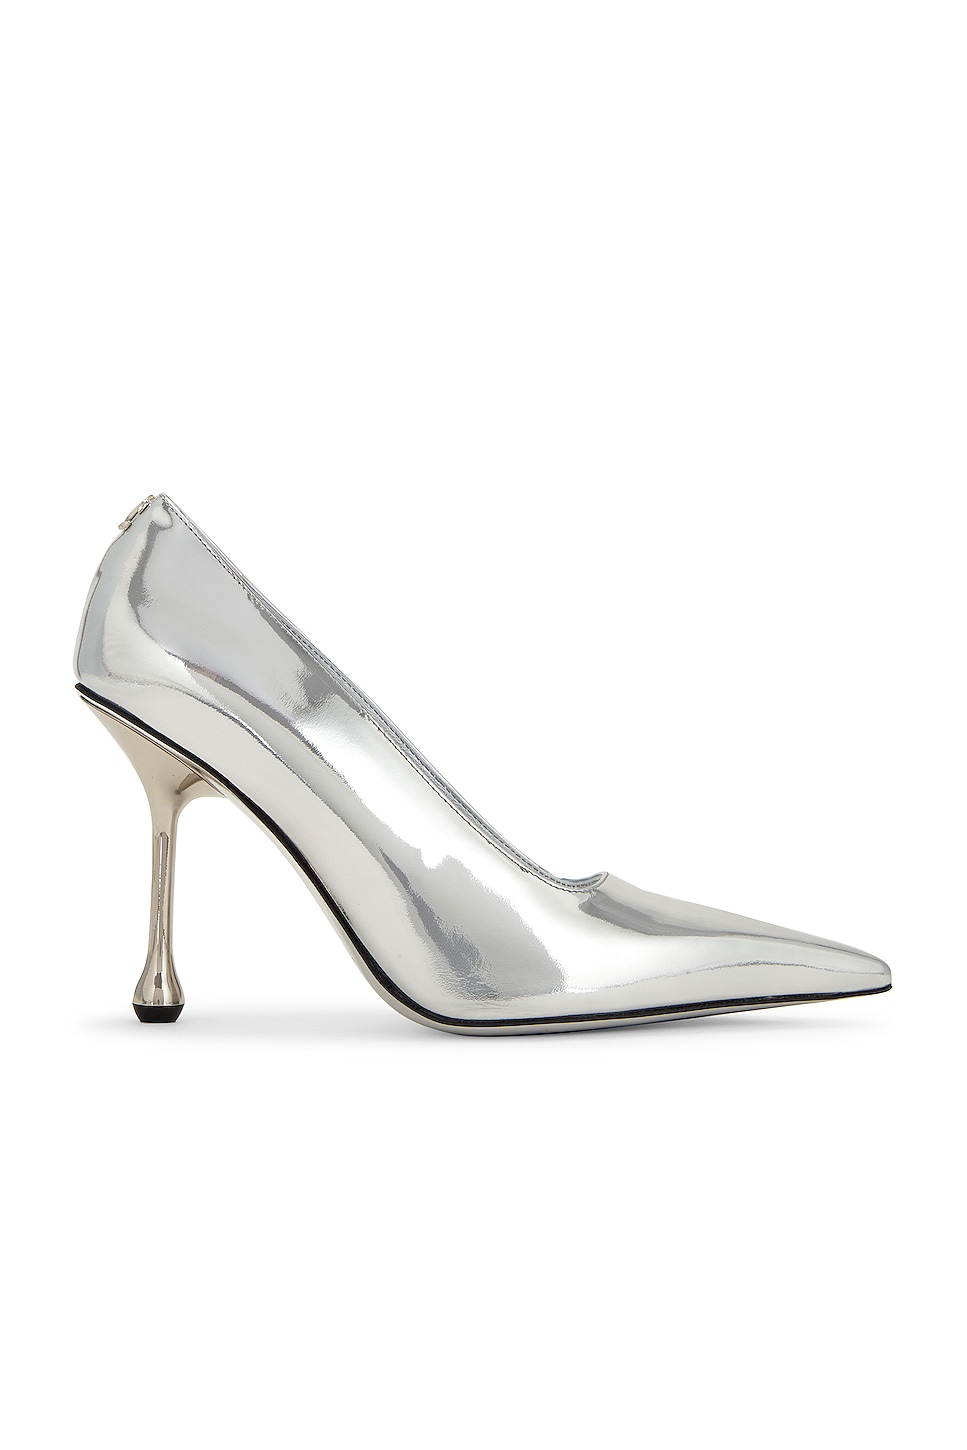 Image 1 of Jimmy Choo Ixia 95 Pump in Silver